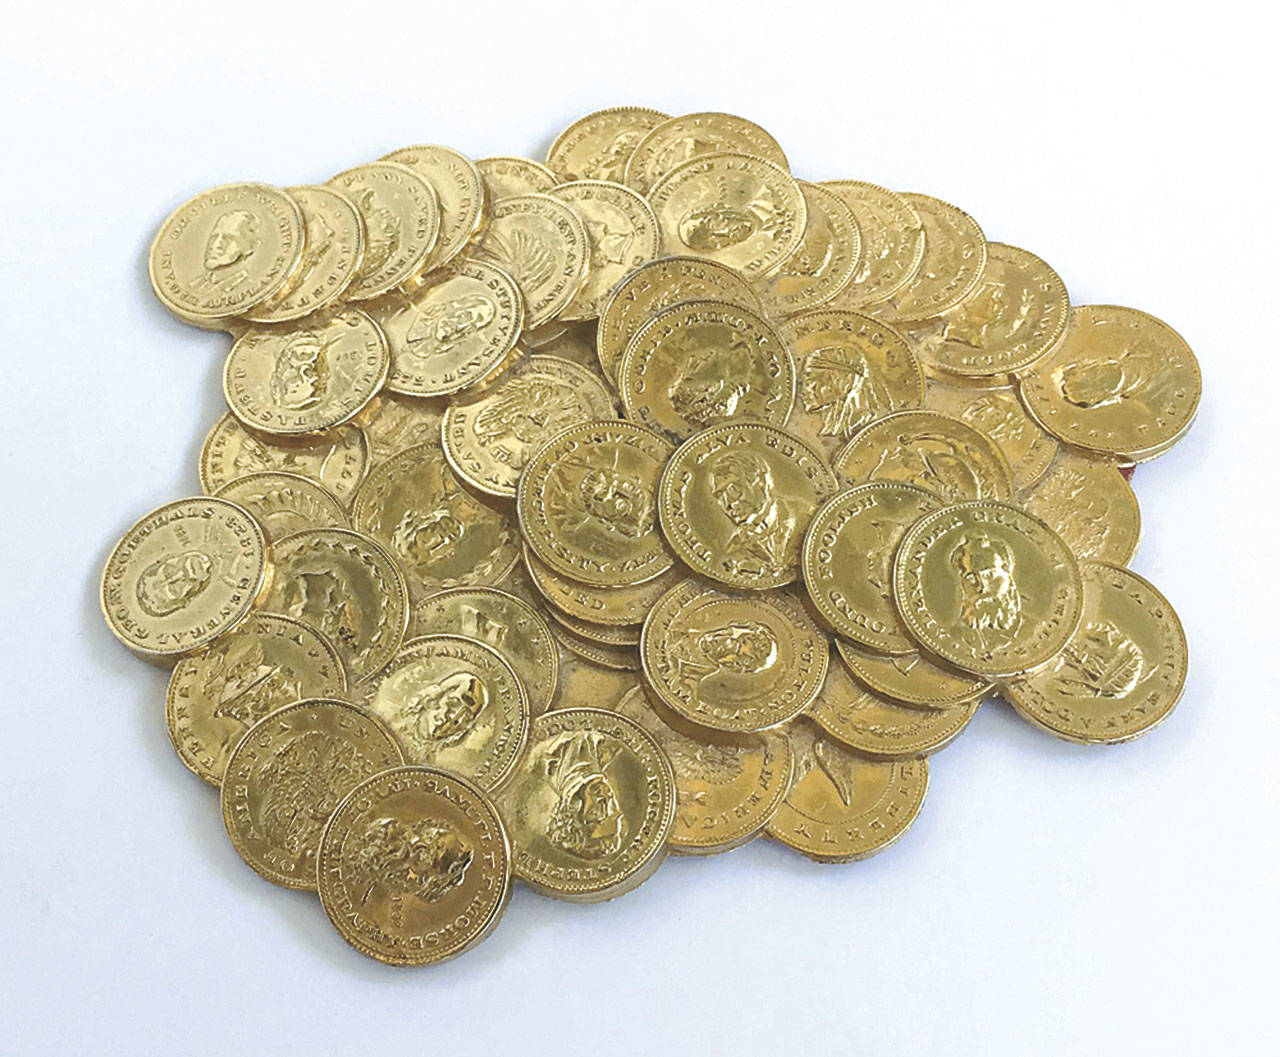 This 5½-inch wide pile of coins is a paperweight, probably first made in the 1960s. It was a popular gift for good customers and executives who were in financial businesses. Some are being sold online for about $40 to $50. (Cowles Syndicate Inc.)